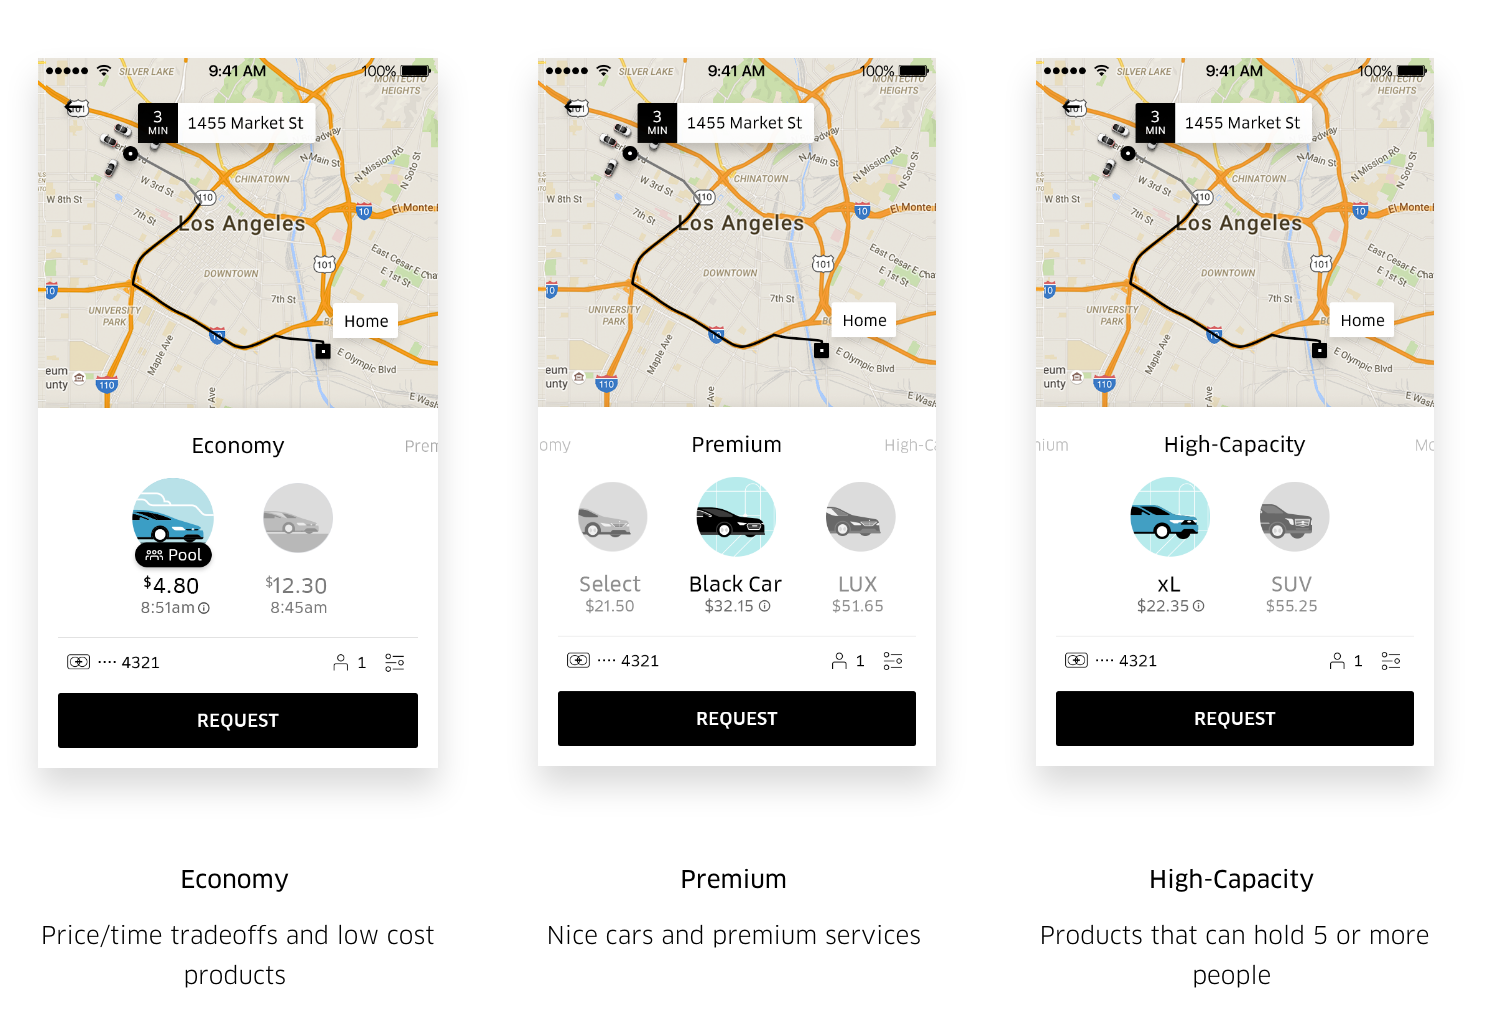 Product selection in the new Uber rider app.